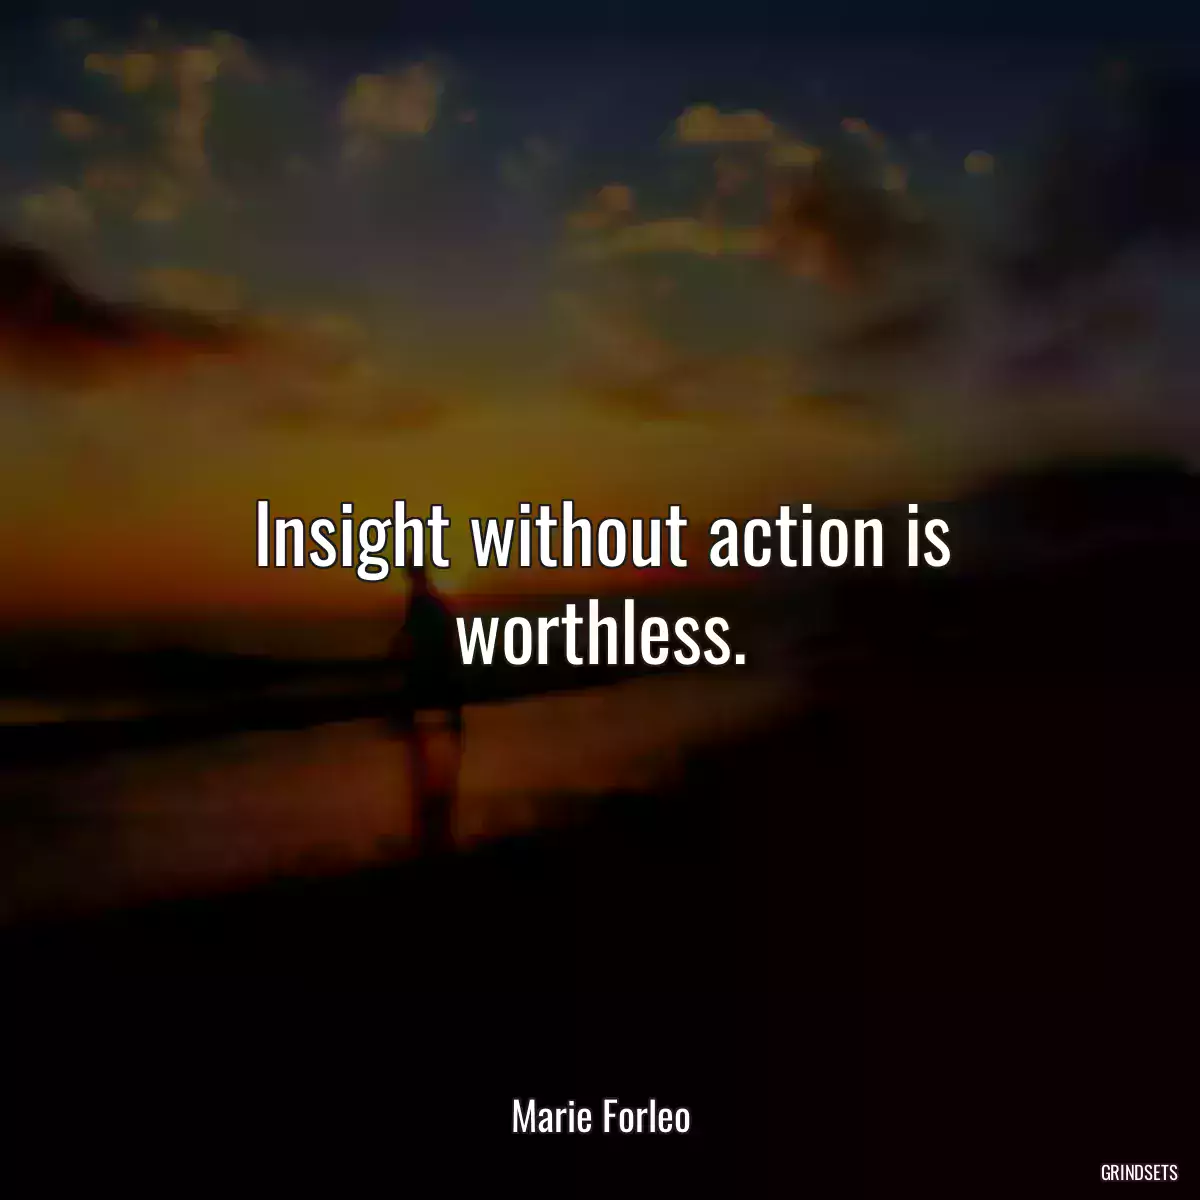 Insight without action is worthless.